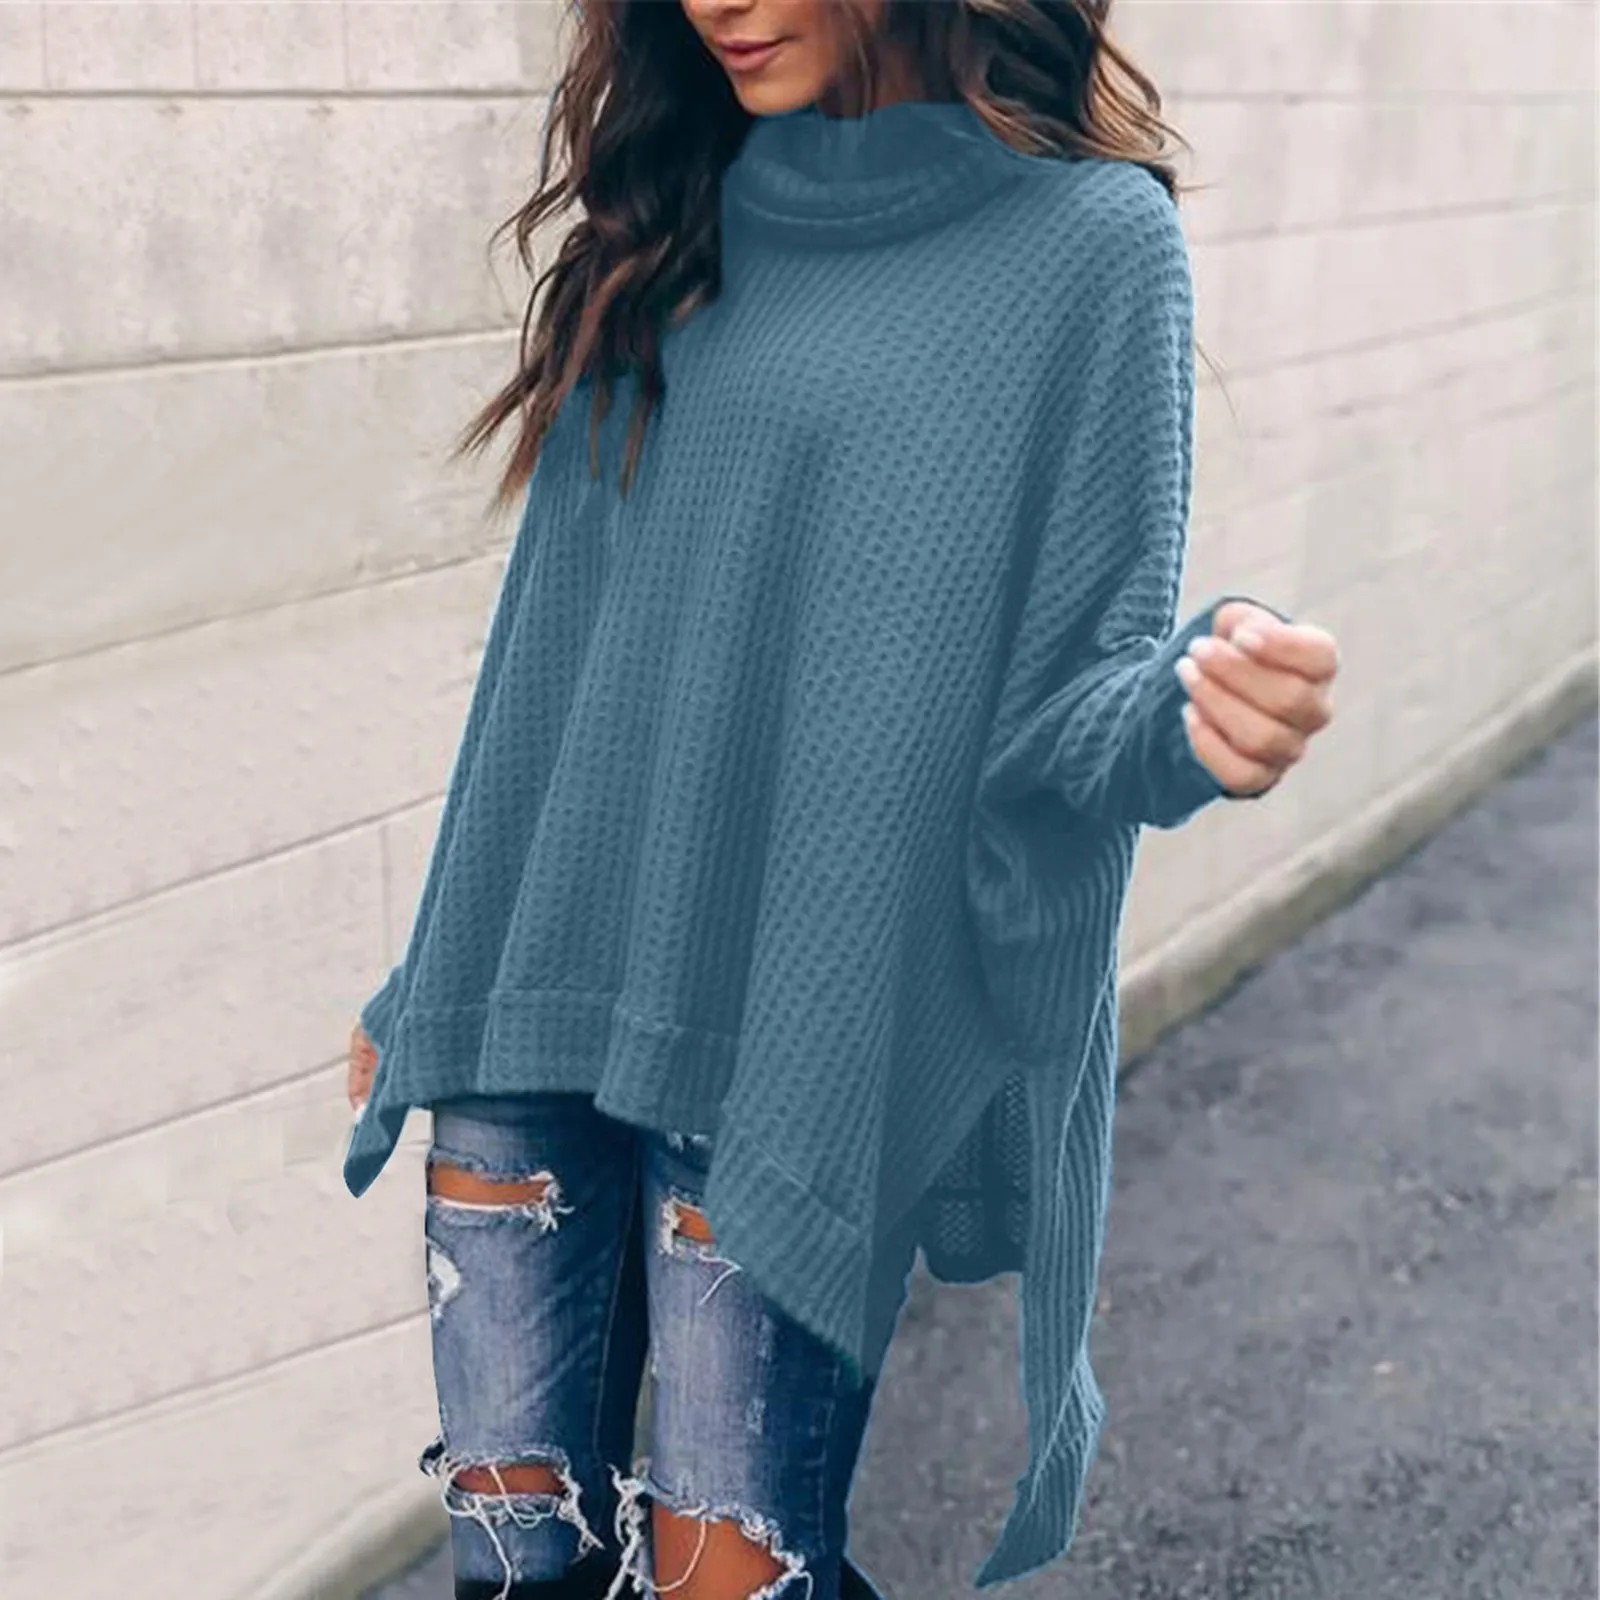 Women Fashion Top Sweater Casual Knitted High Neck Shirt Long Sleeve Pullover Sweater Fuzzy Sweater Warm Womens Long Sweater